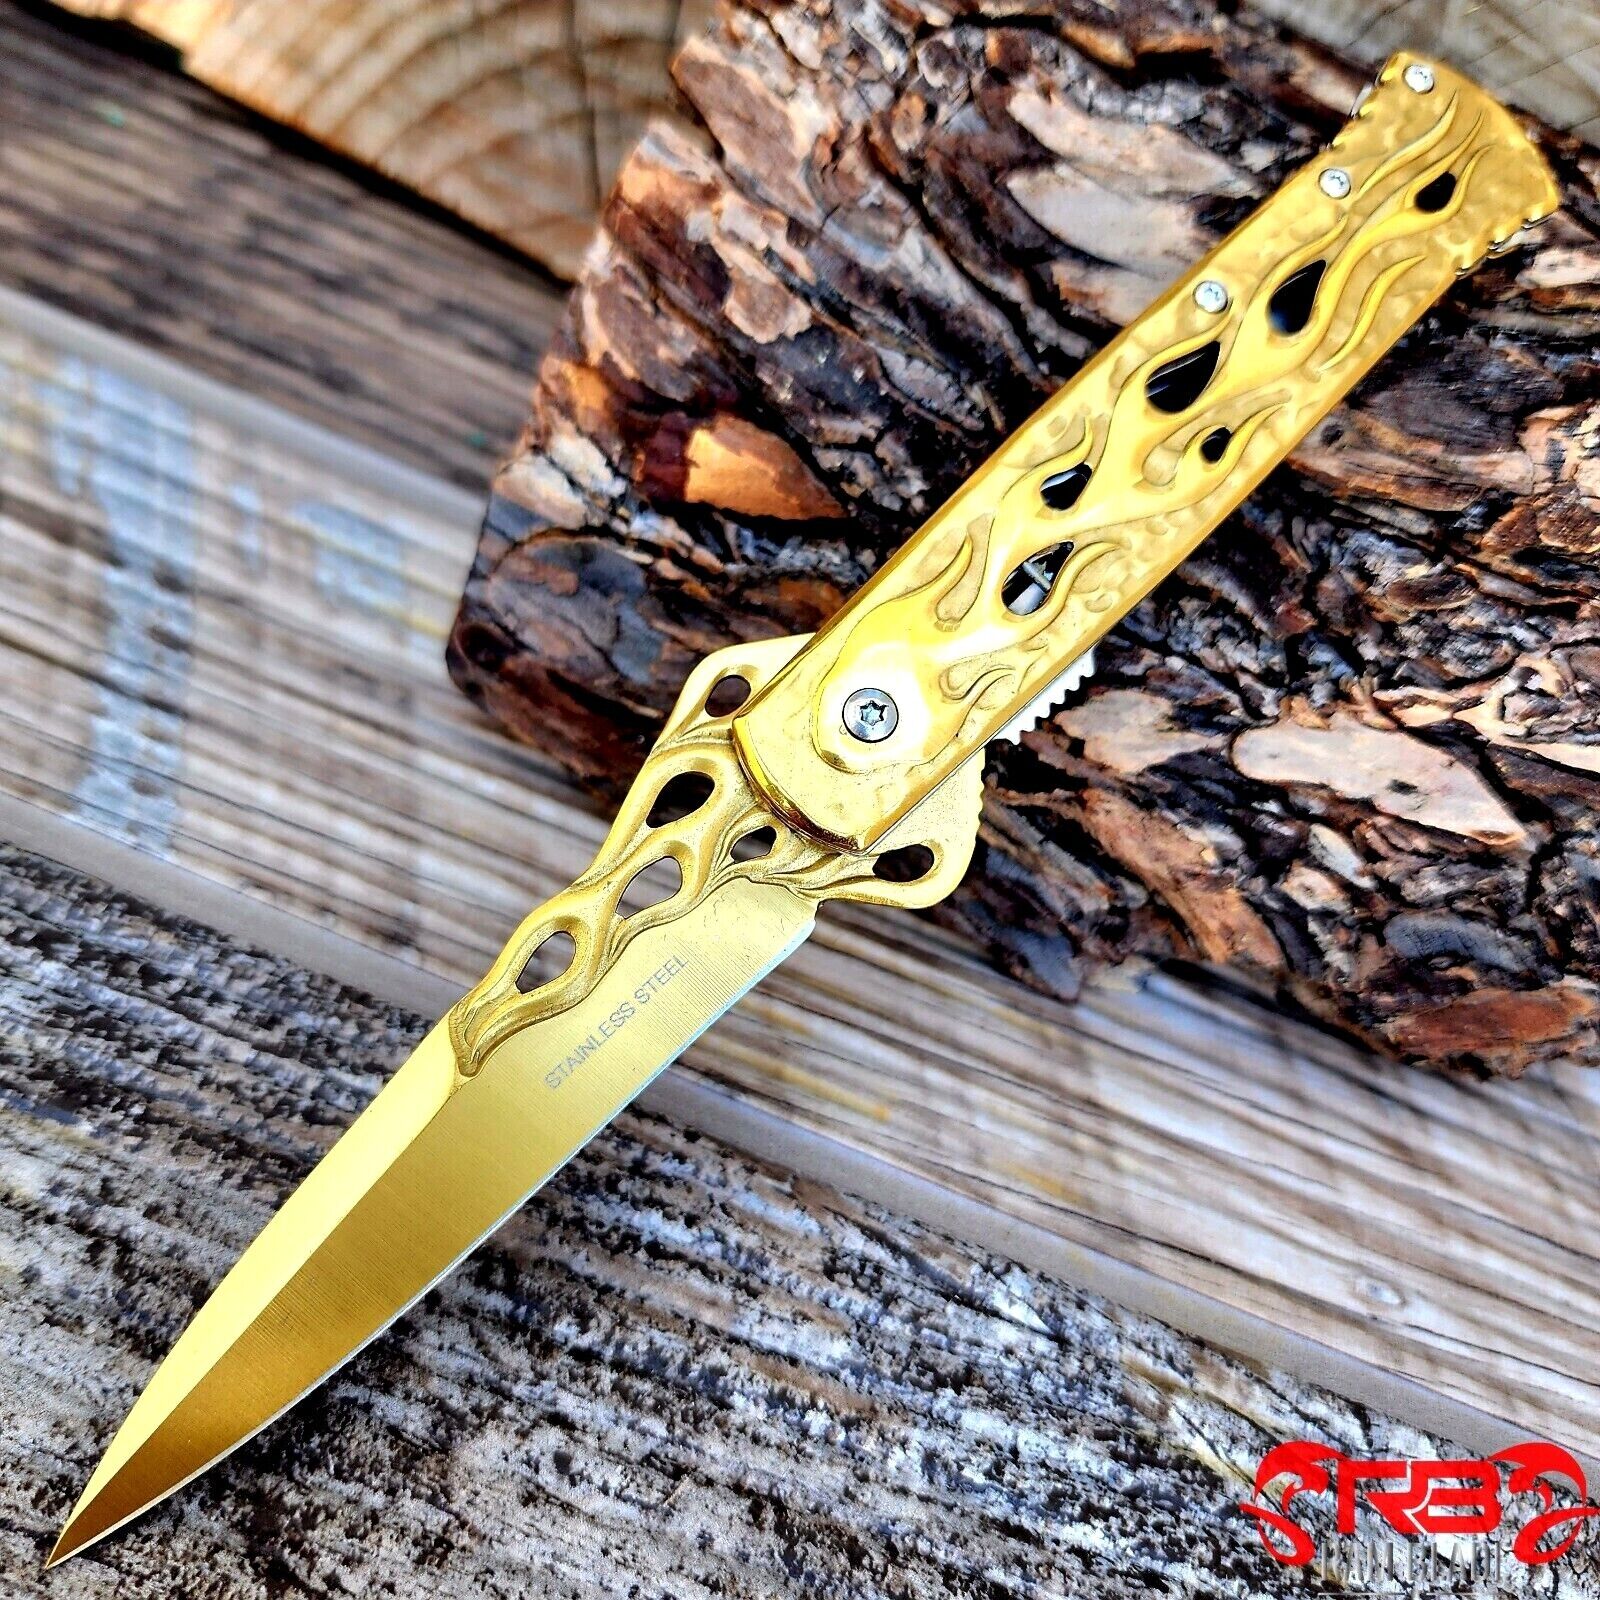 9” FLAME SPRING OPEN ASSISTED TACTICAL FOLDING OPEN POCKET KNIFE EDC Blade